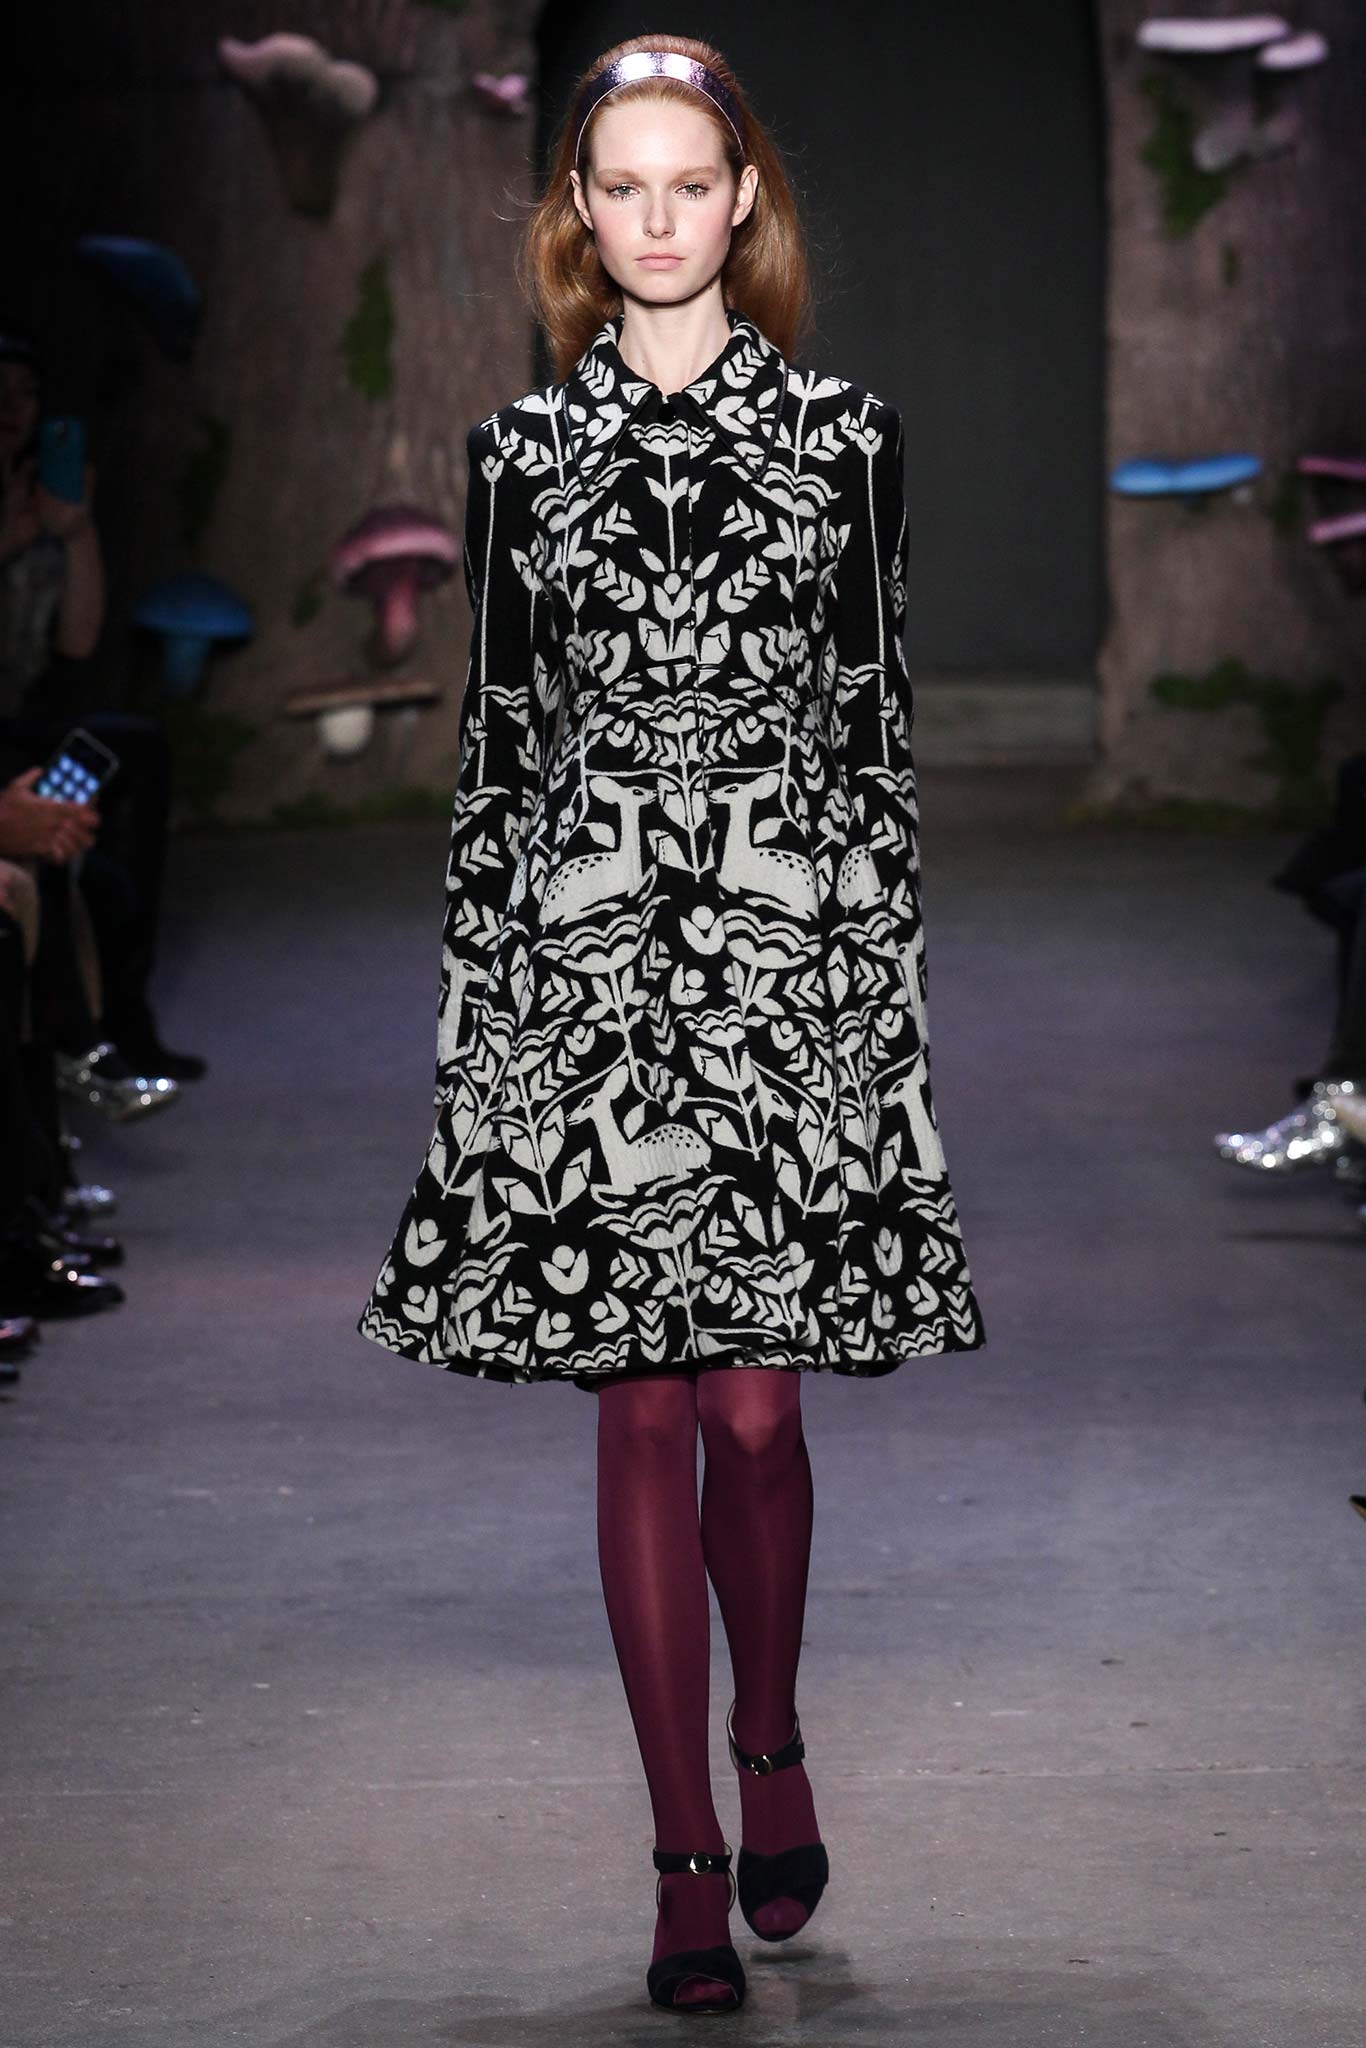 HONOR AUTUMN/WINTER 2015-16 READY-TO-WEAR NEW YORK